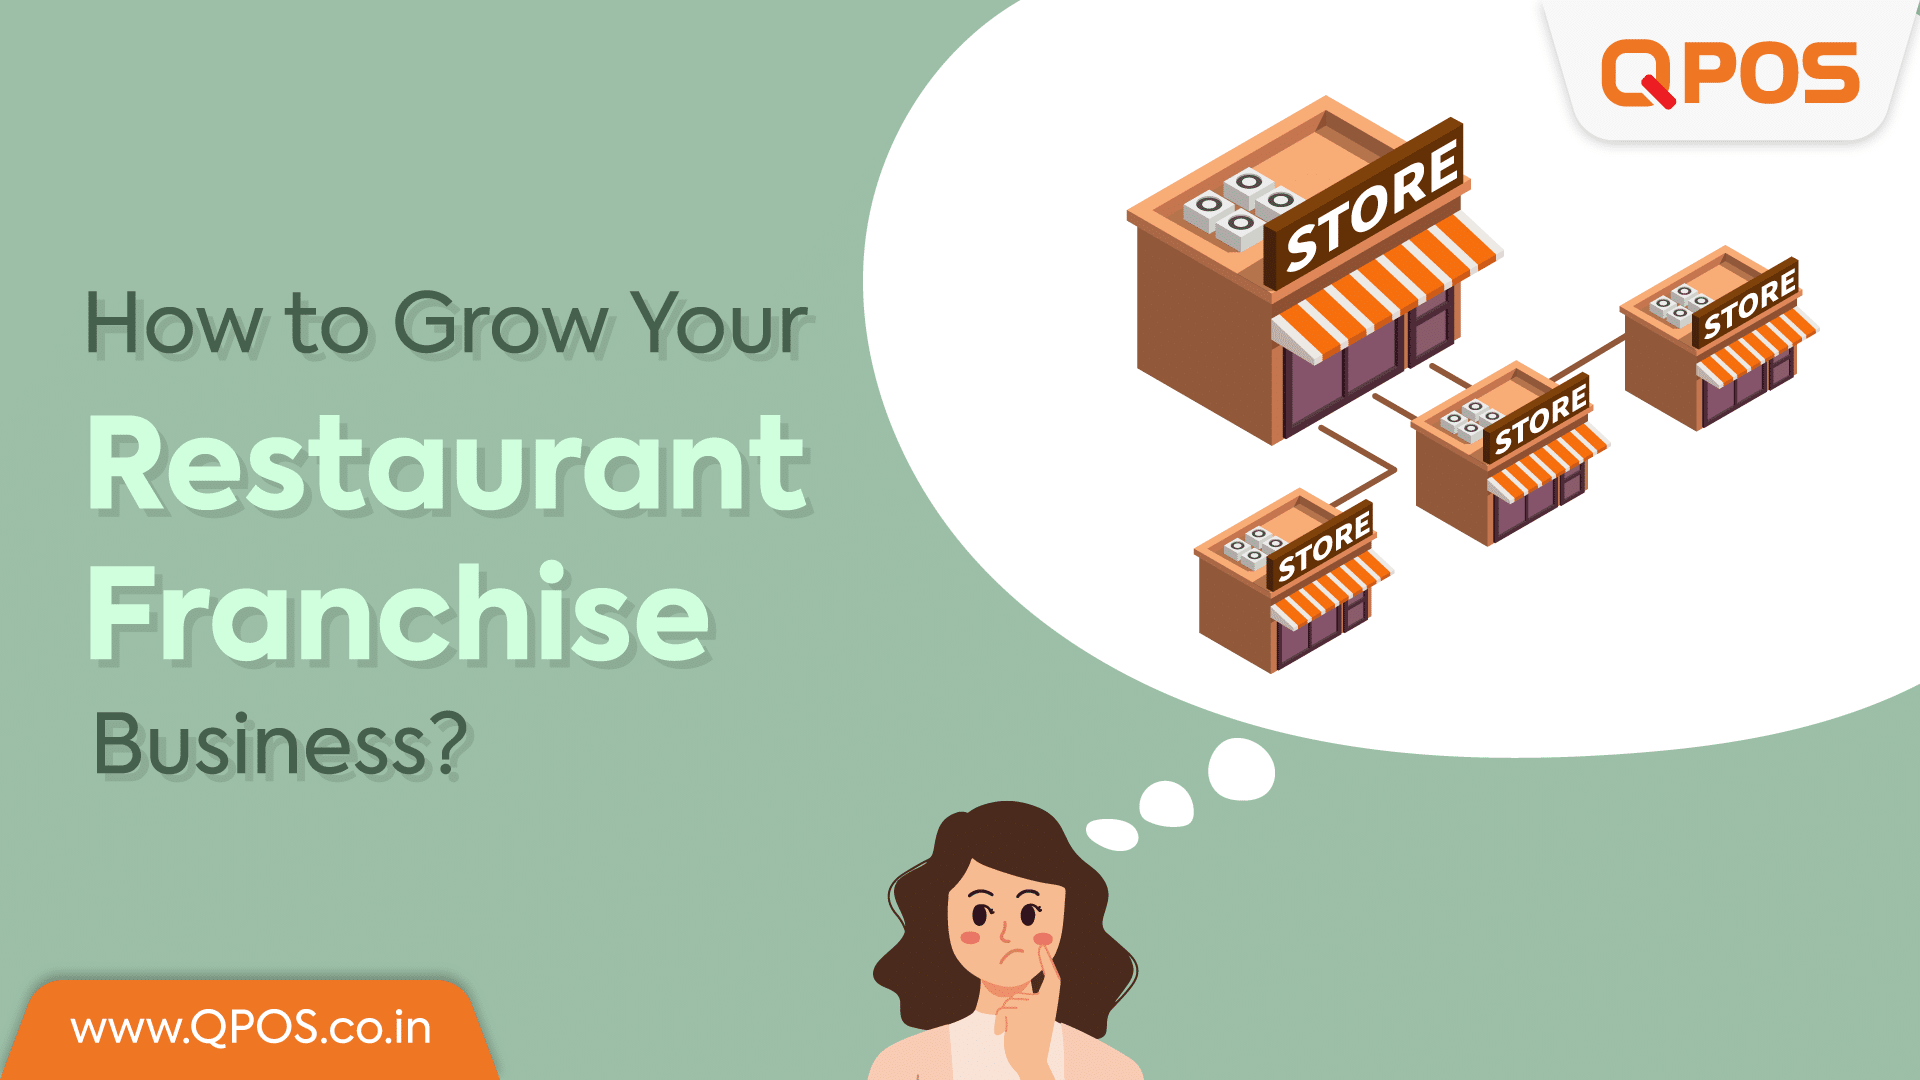 QPOS - How to Grow Your Restaurant Franchise Business